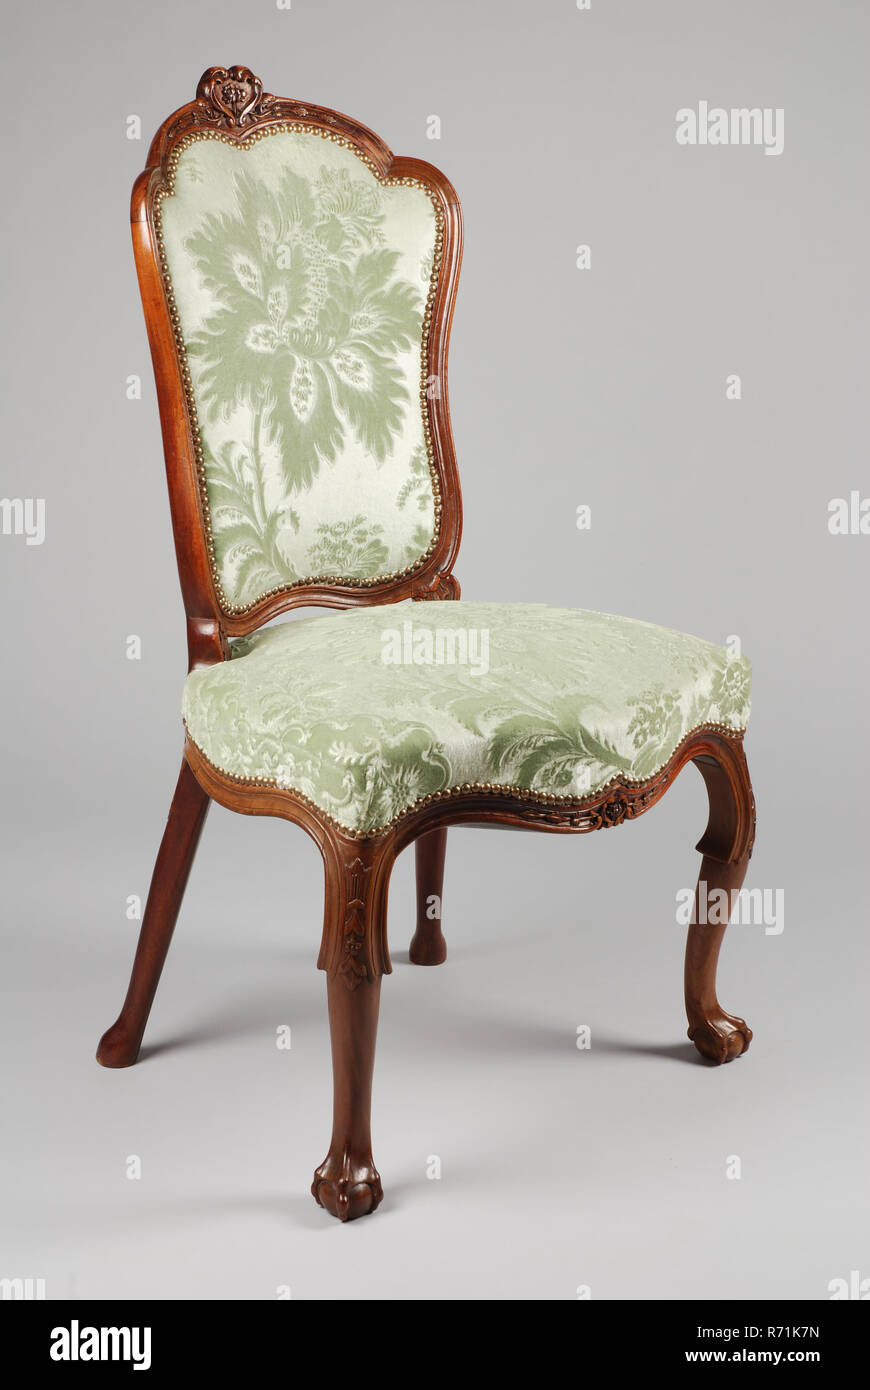 Mahogany Rococo Chair Chair Seating Furniture Furniture Interior